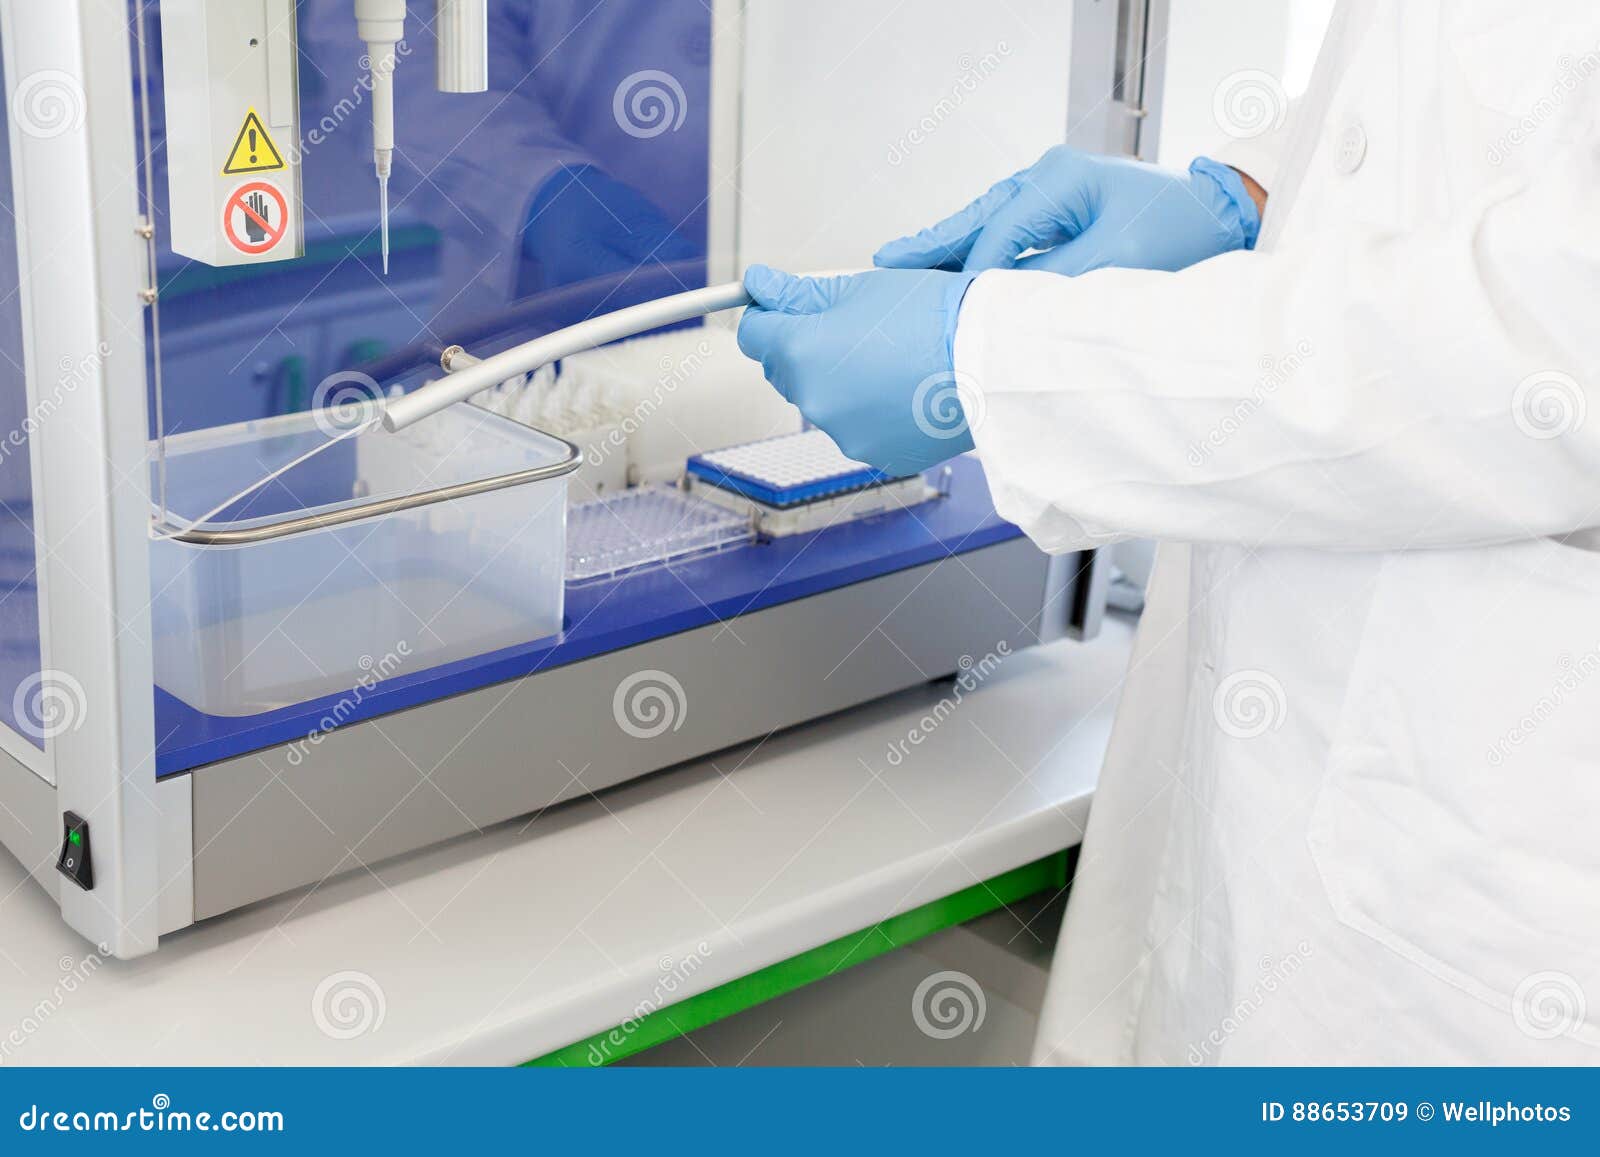 Scientist Working in the Laboratory Stock Image - Image of chemistry ...